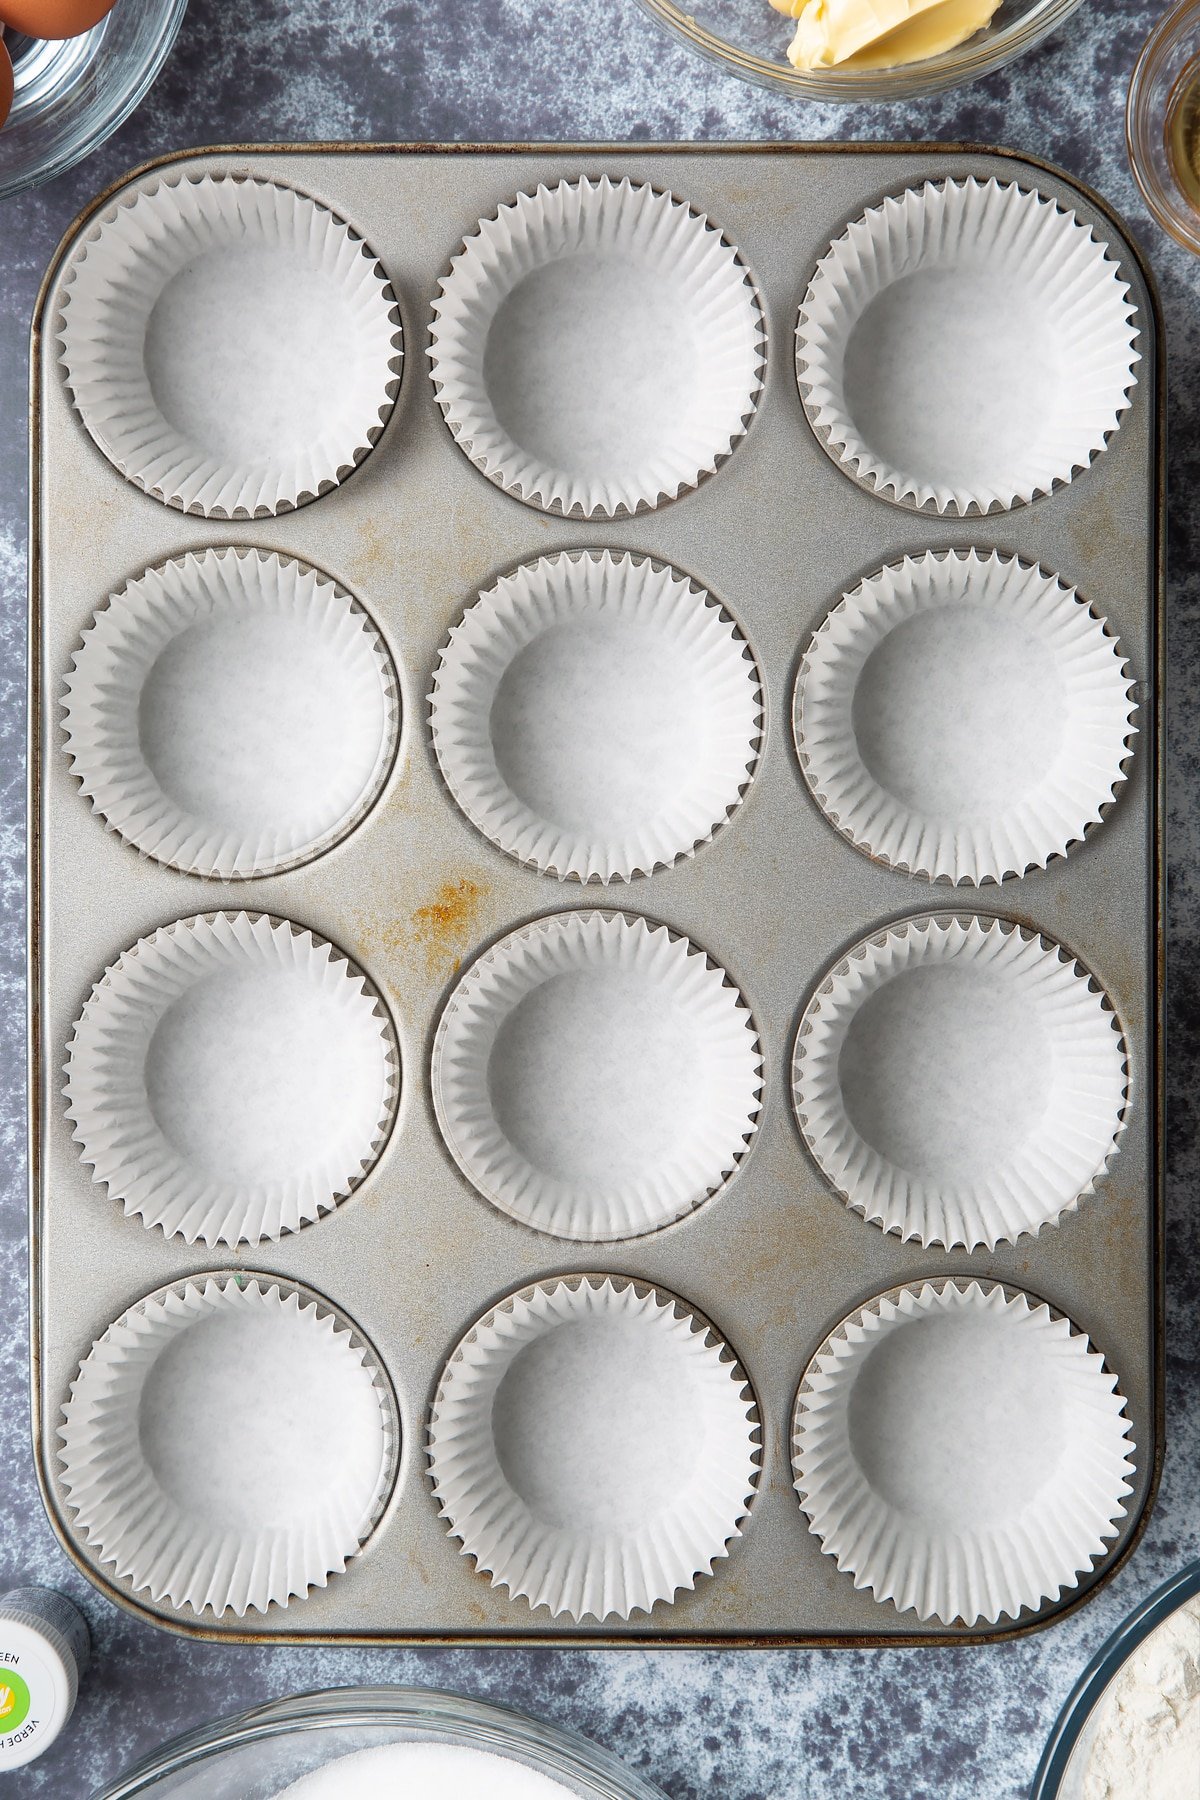 12 hole muffin tray lined with cupcake cases. Ingredients to make green monster cakes surround the tray. 